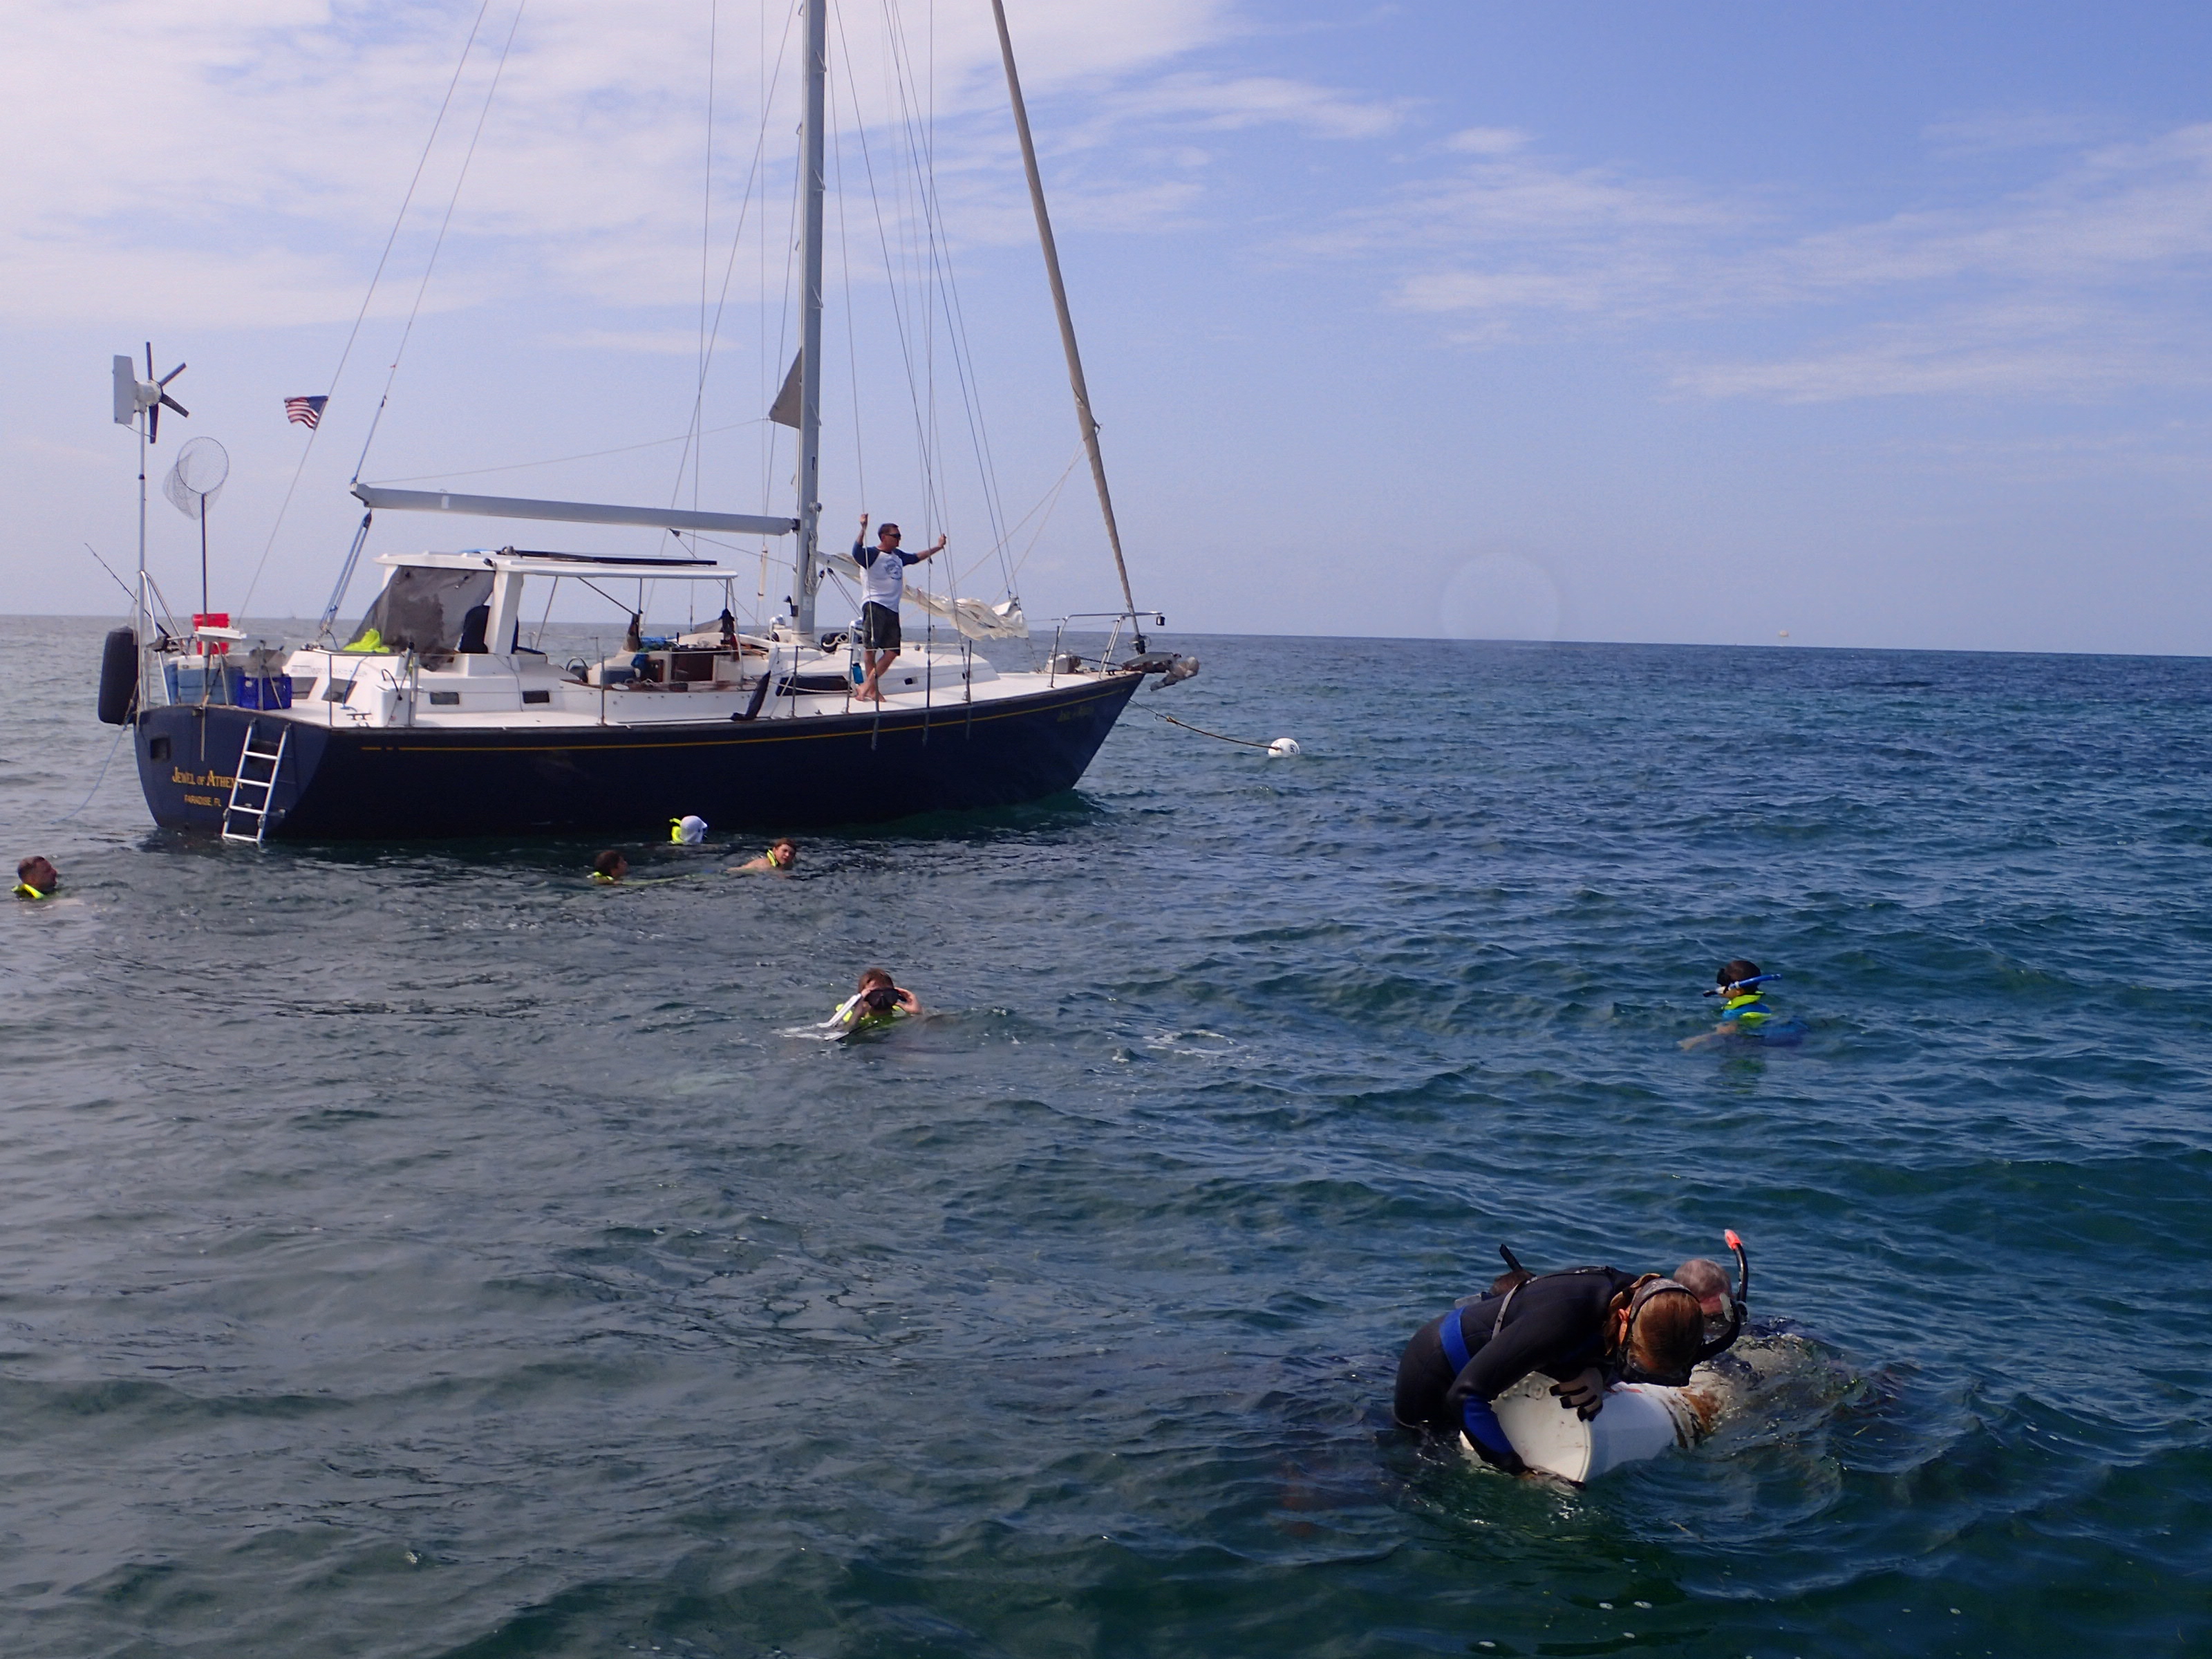 Staff cleaning the informational buoy at San Pedro. A sailboat is tied up to the mooring buoy while a group of Boy Scouts snorkel.